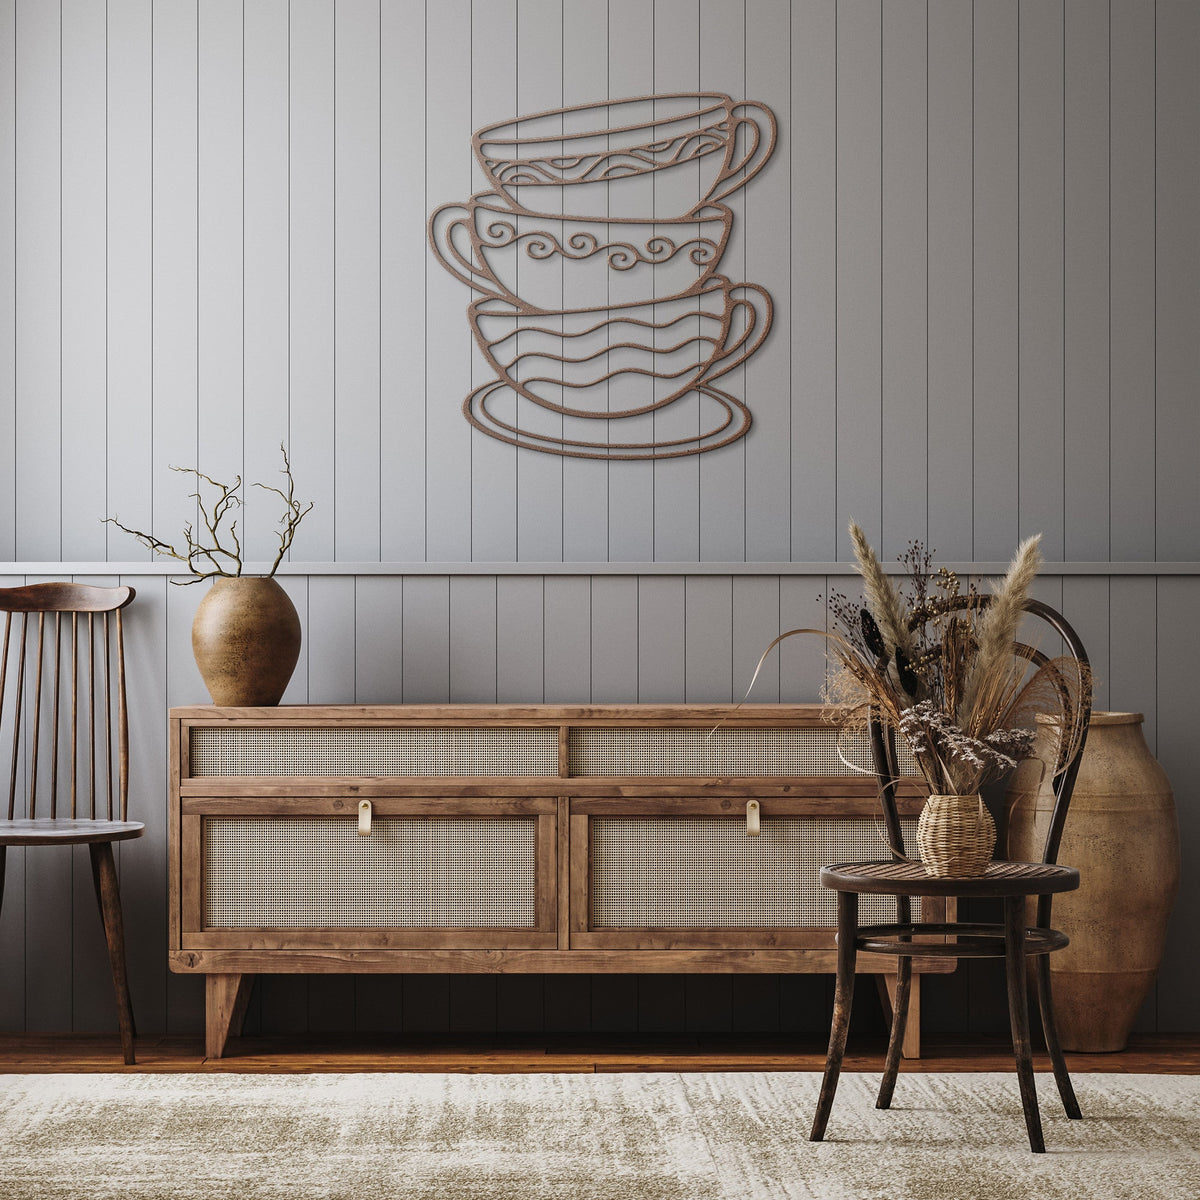 Stacked Tea Cups | Metal Wall Art - abrandilion